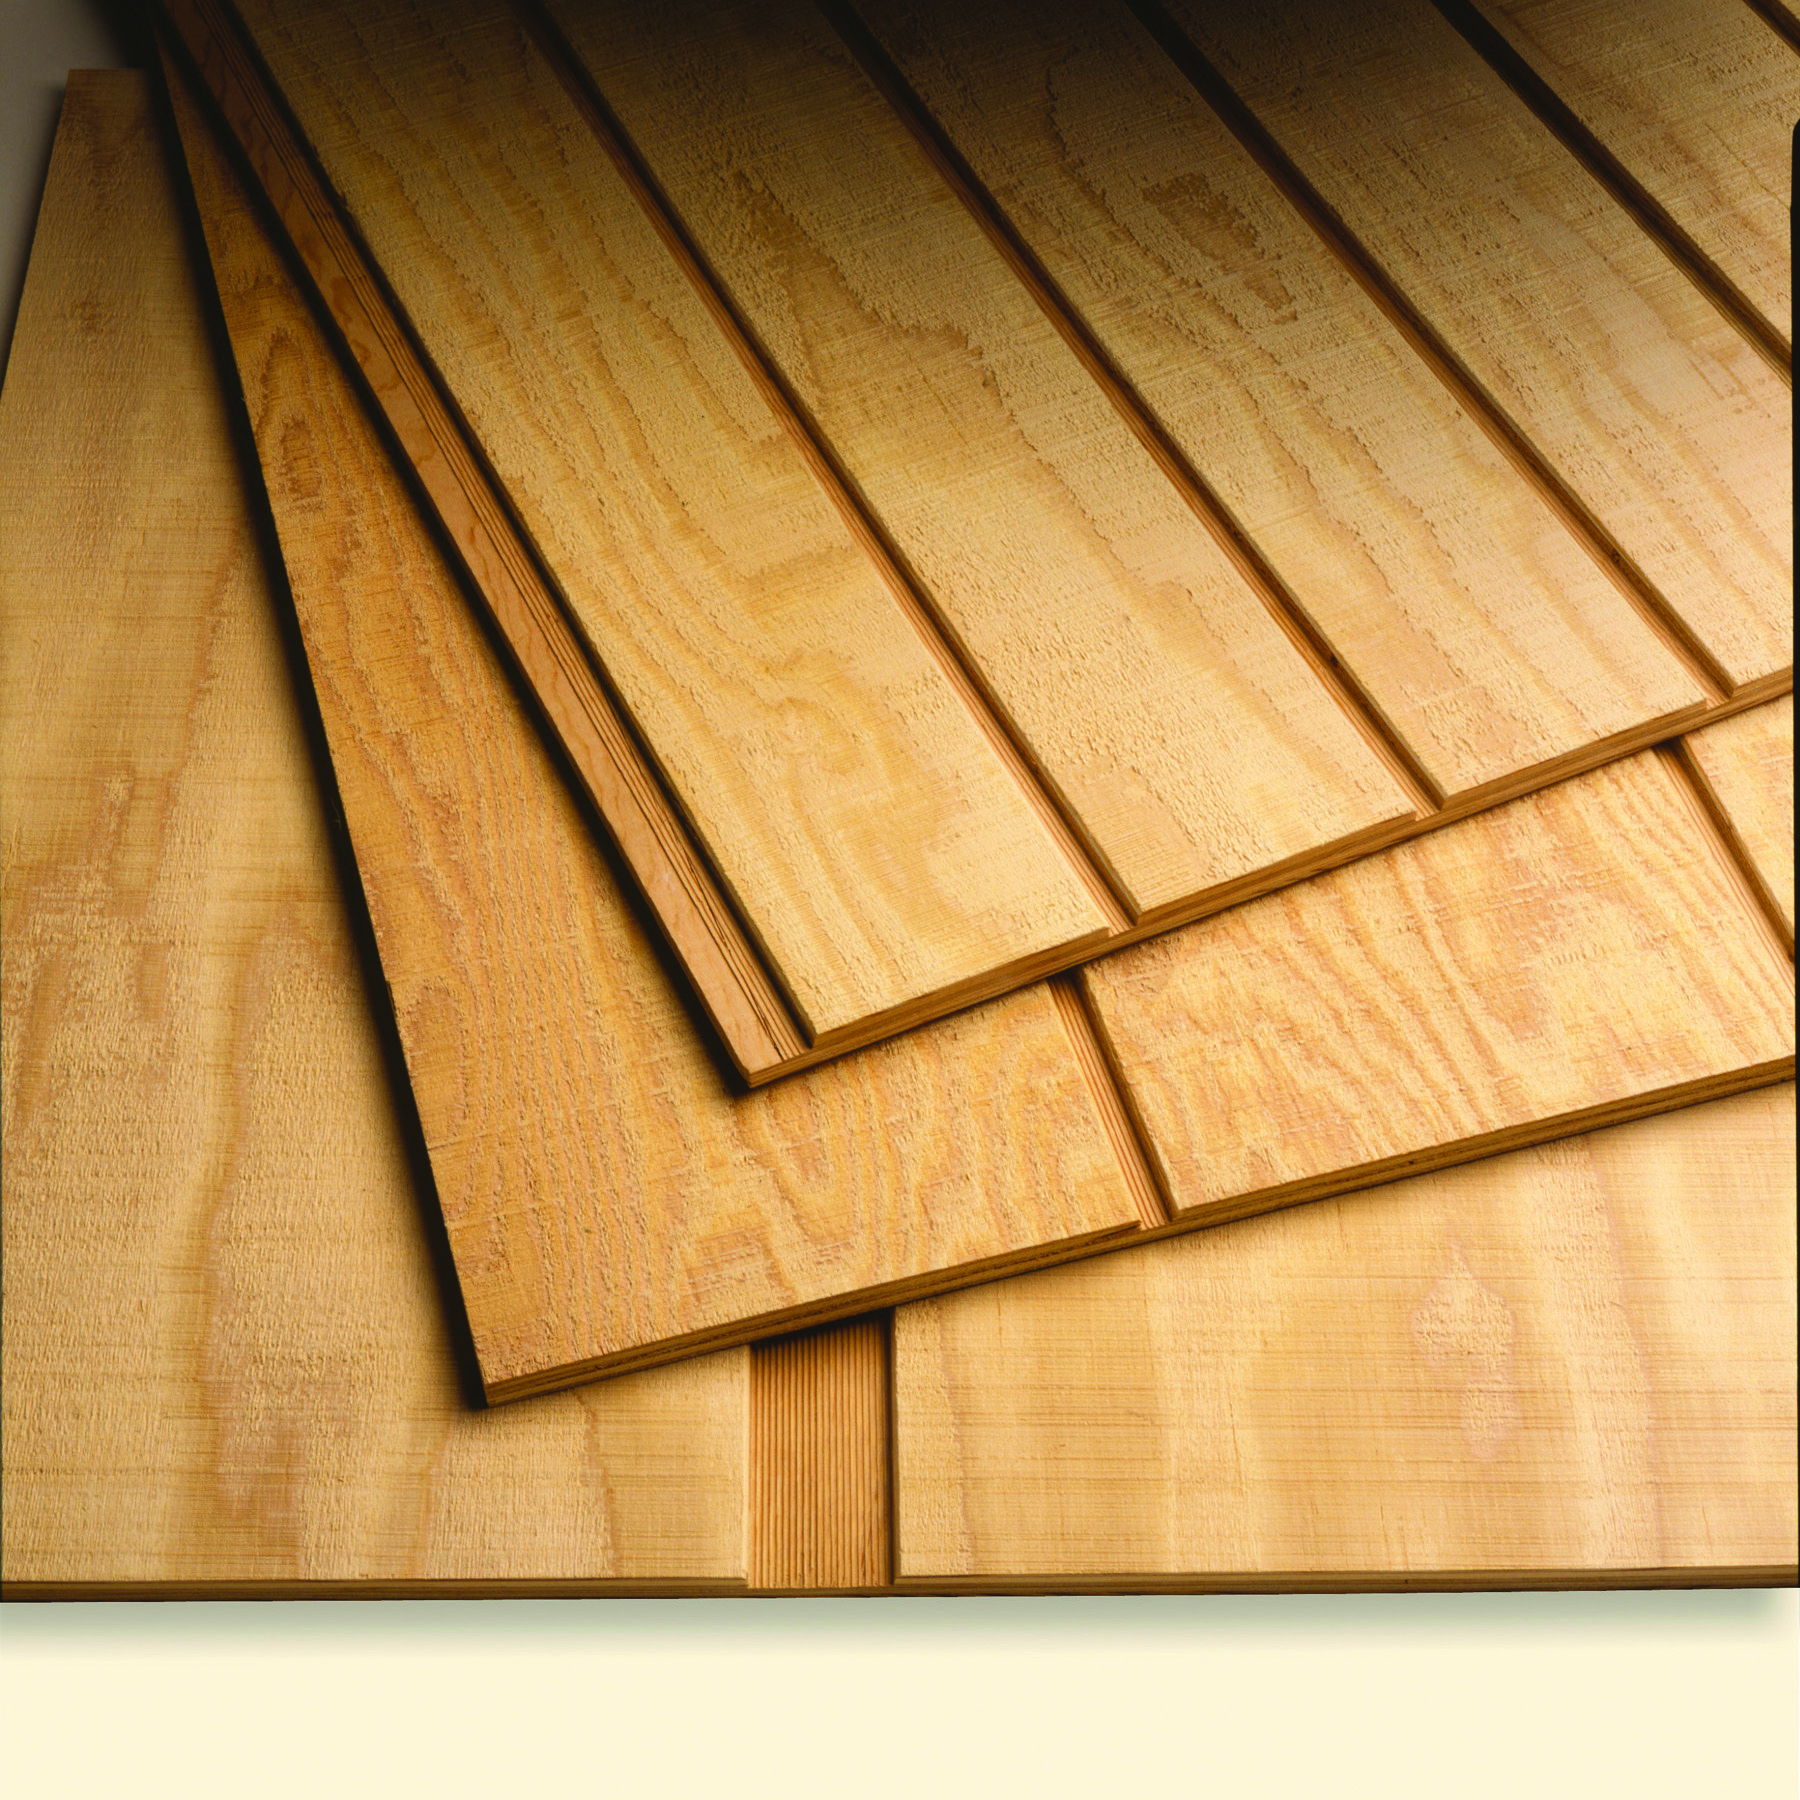 Douglas Fir Plywood Siding Weekes Forest Products